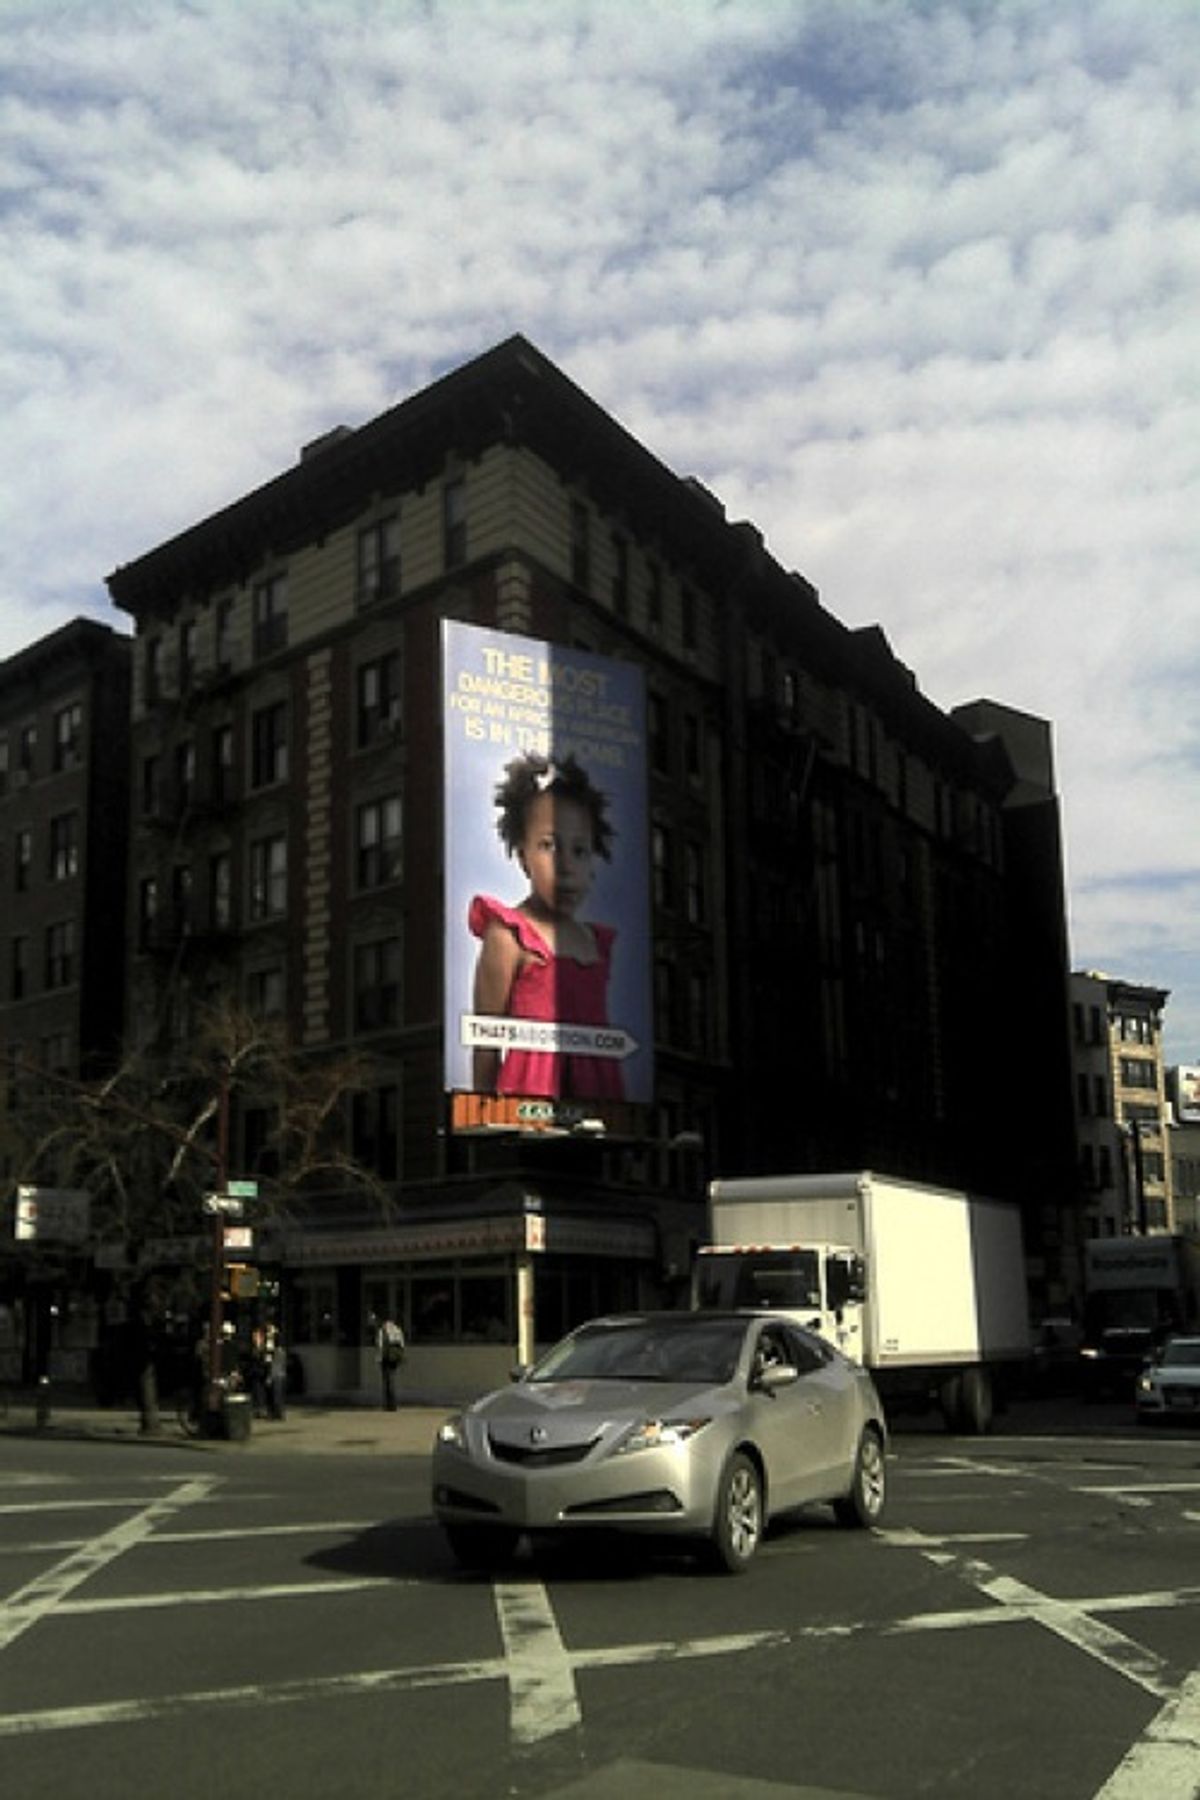 The anti-abortion billboard stands at the corner of 6th street in SoHo